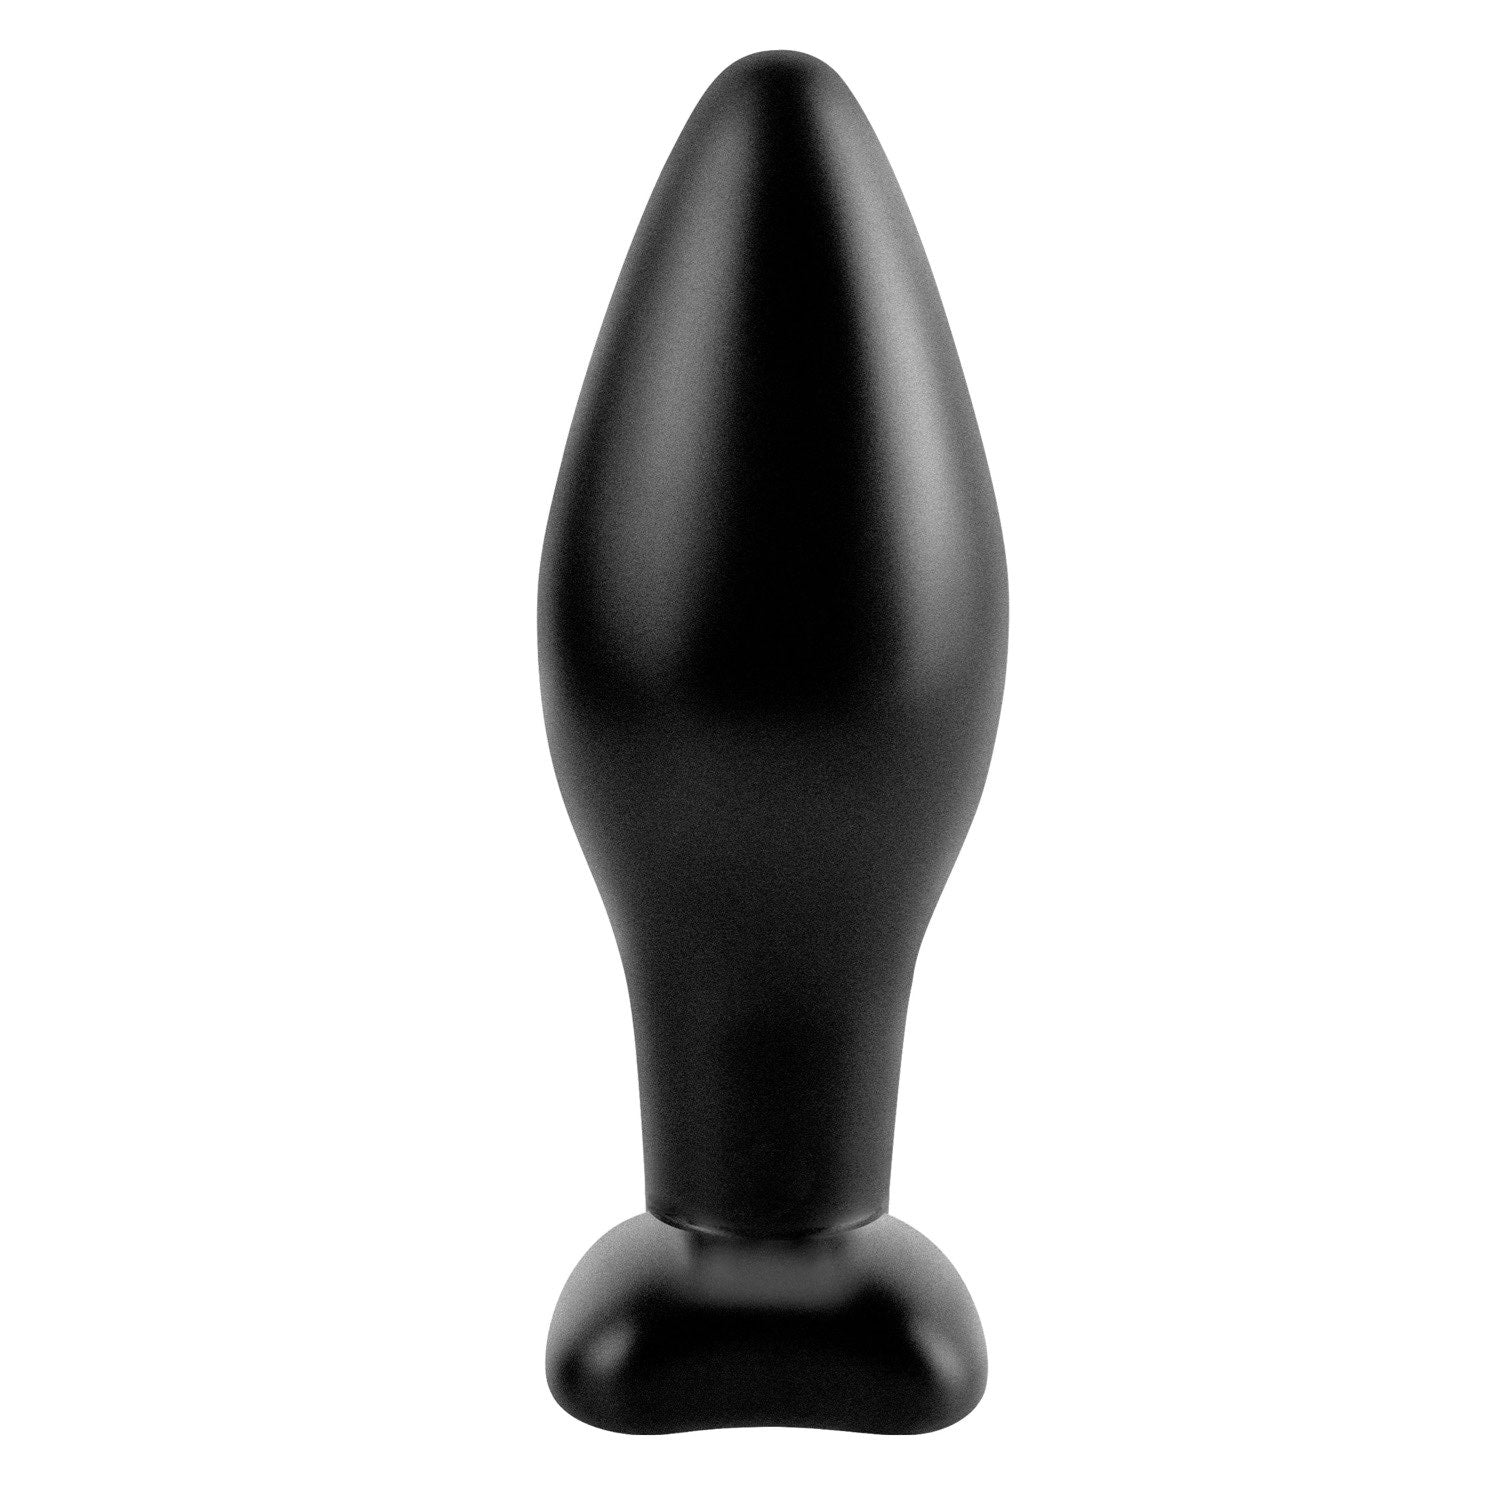 Anal Fantasy Collection Medium Silicone Plug - Black 11 cm (4.25&quot;) Butt Plug by Pipedream